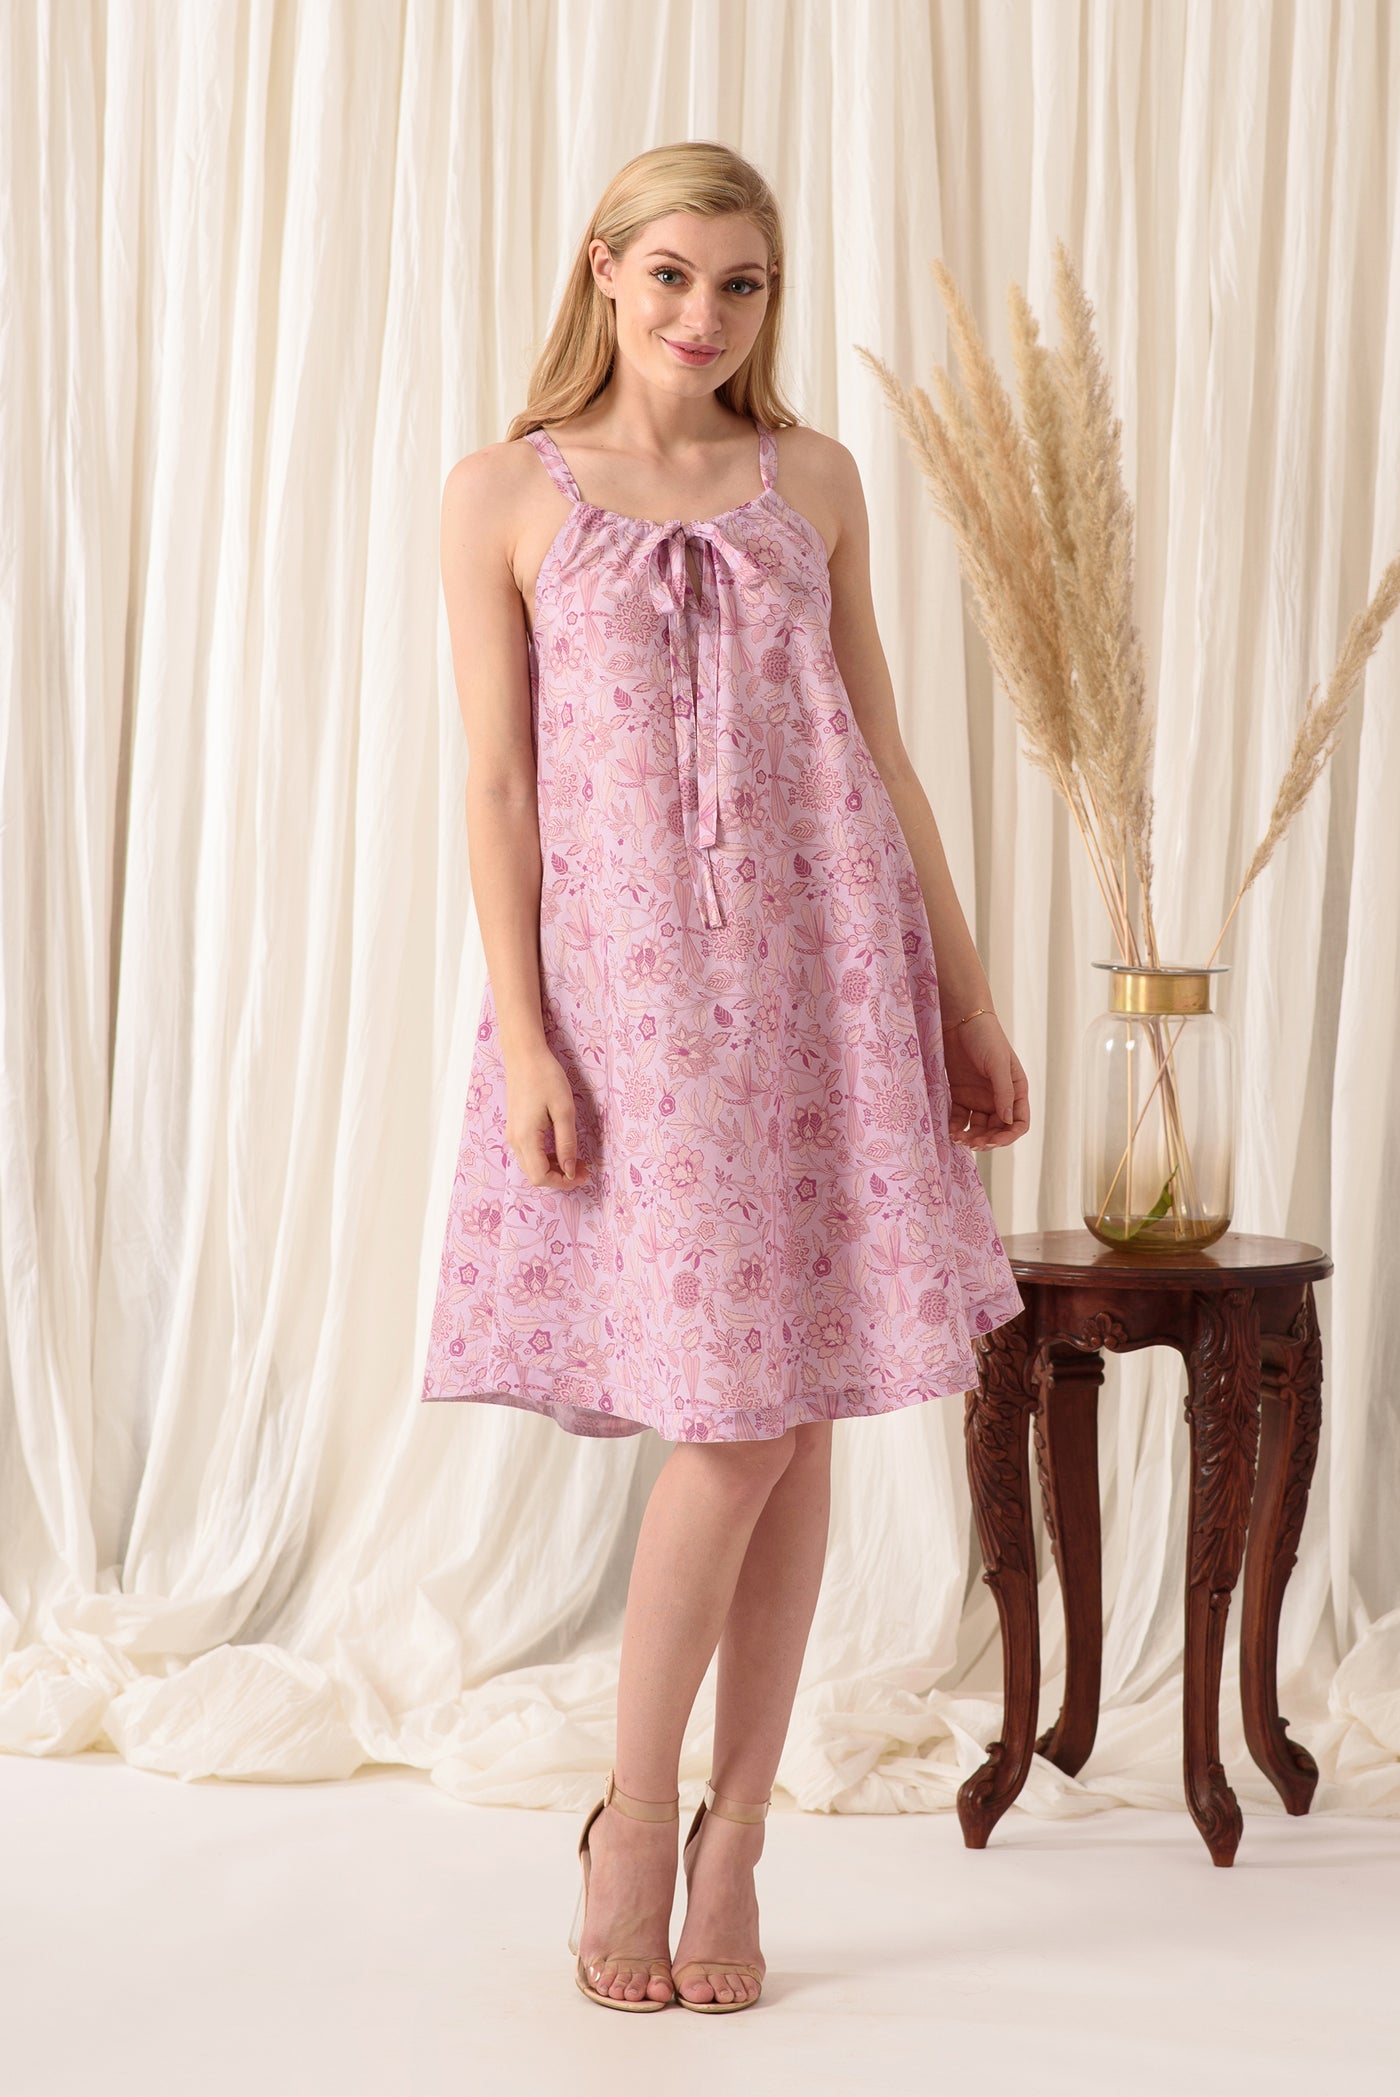 THE BEAUTIFUL SUNDRESS IN BARBIE PINK